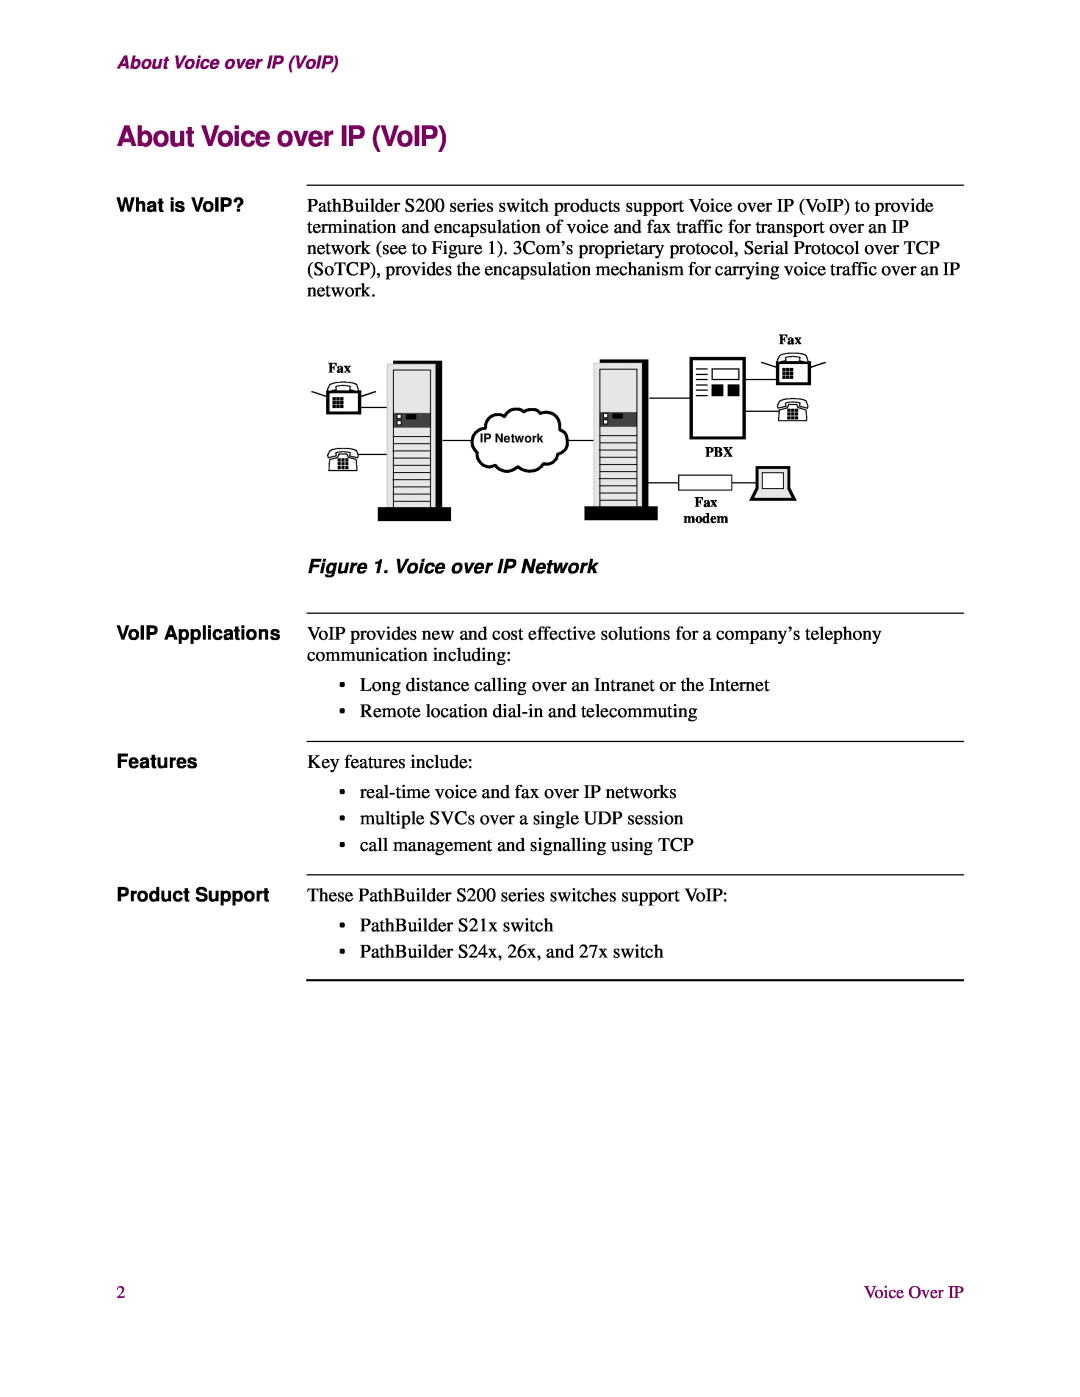 3Com S200 manual About Voice over IP VoIP, Voice over IP Network, Features 